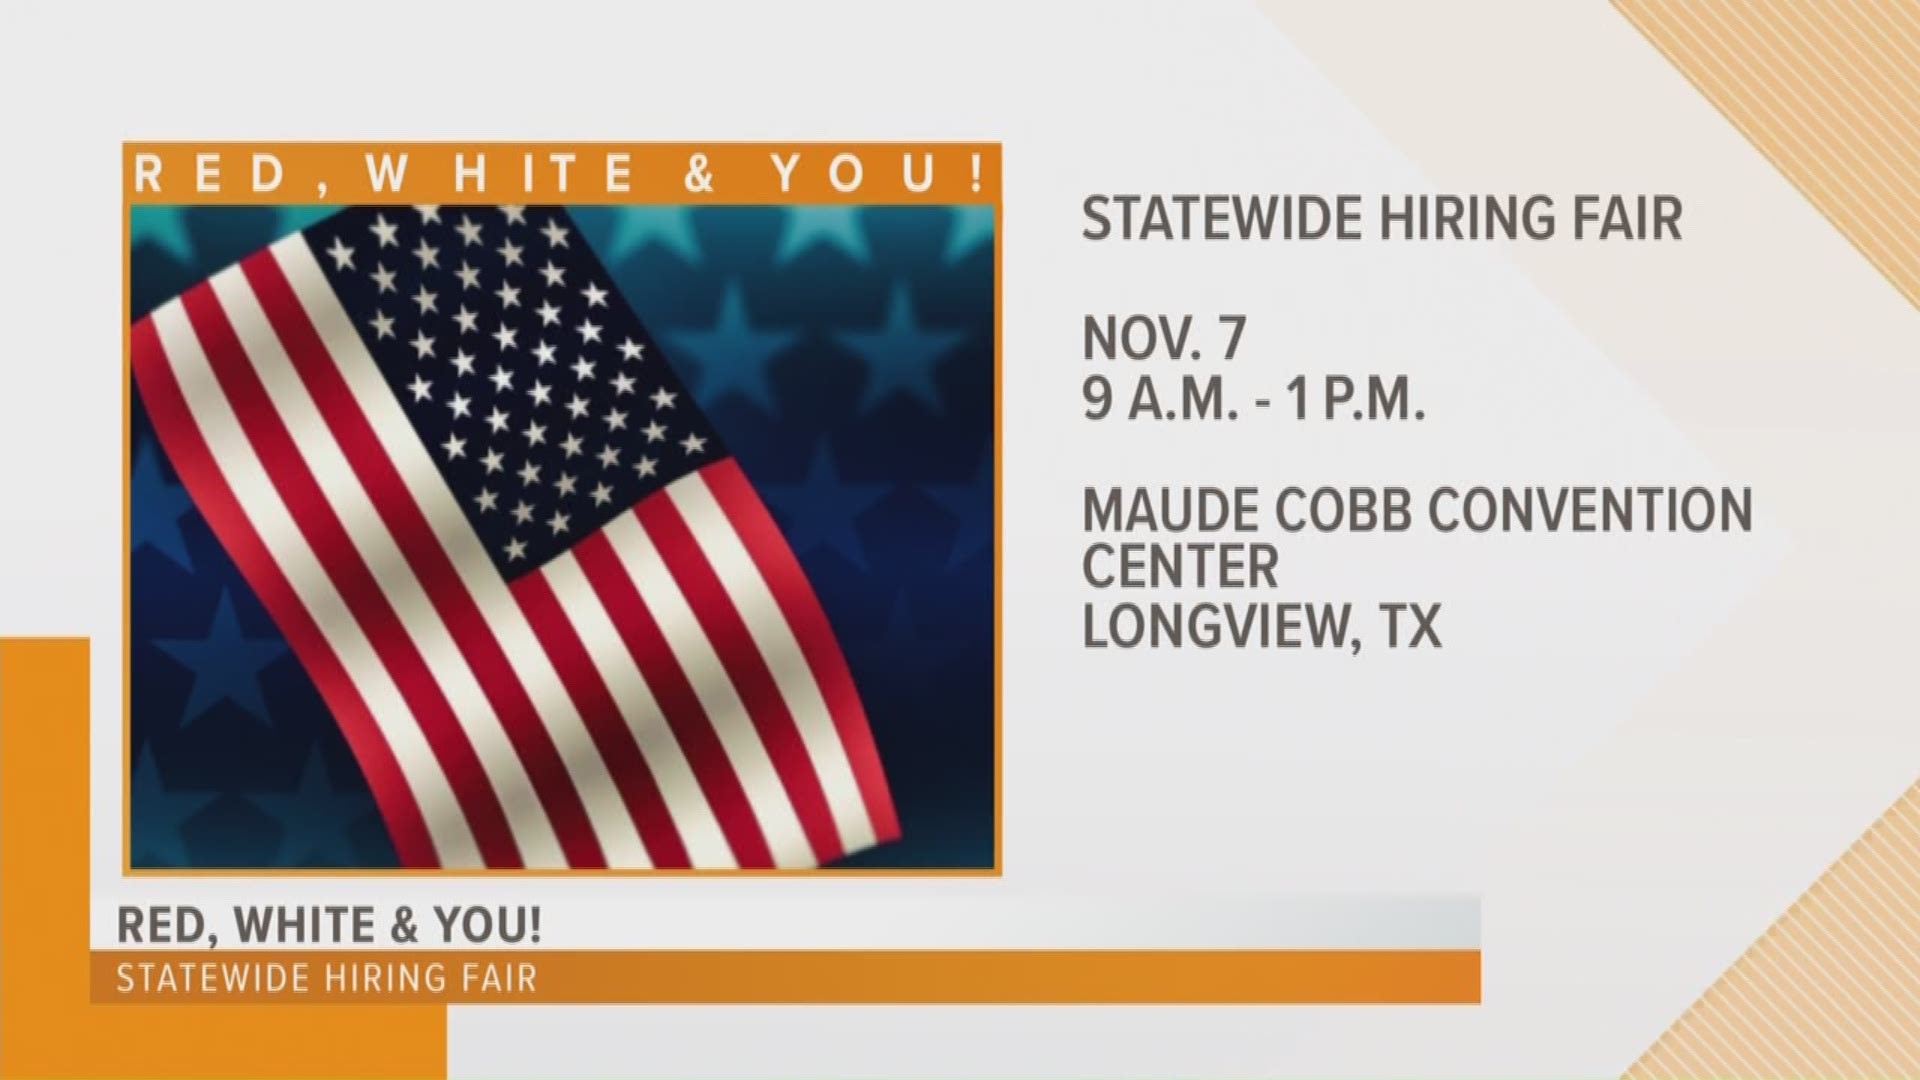 Workforce Solutions East Texas is hosting a job fair for veterans their families on Nov. 7 at the Maude Cobb in Longview.